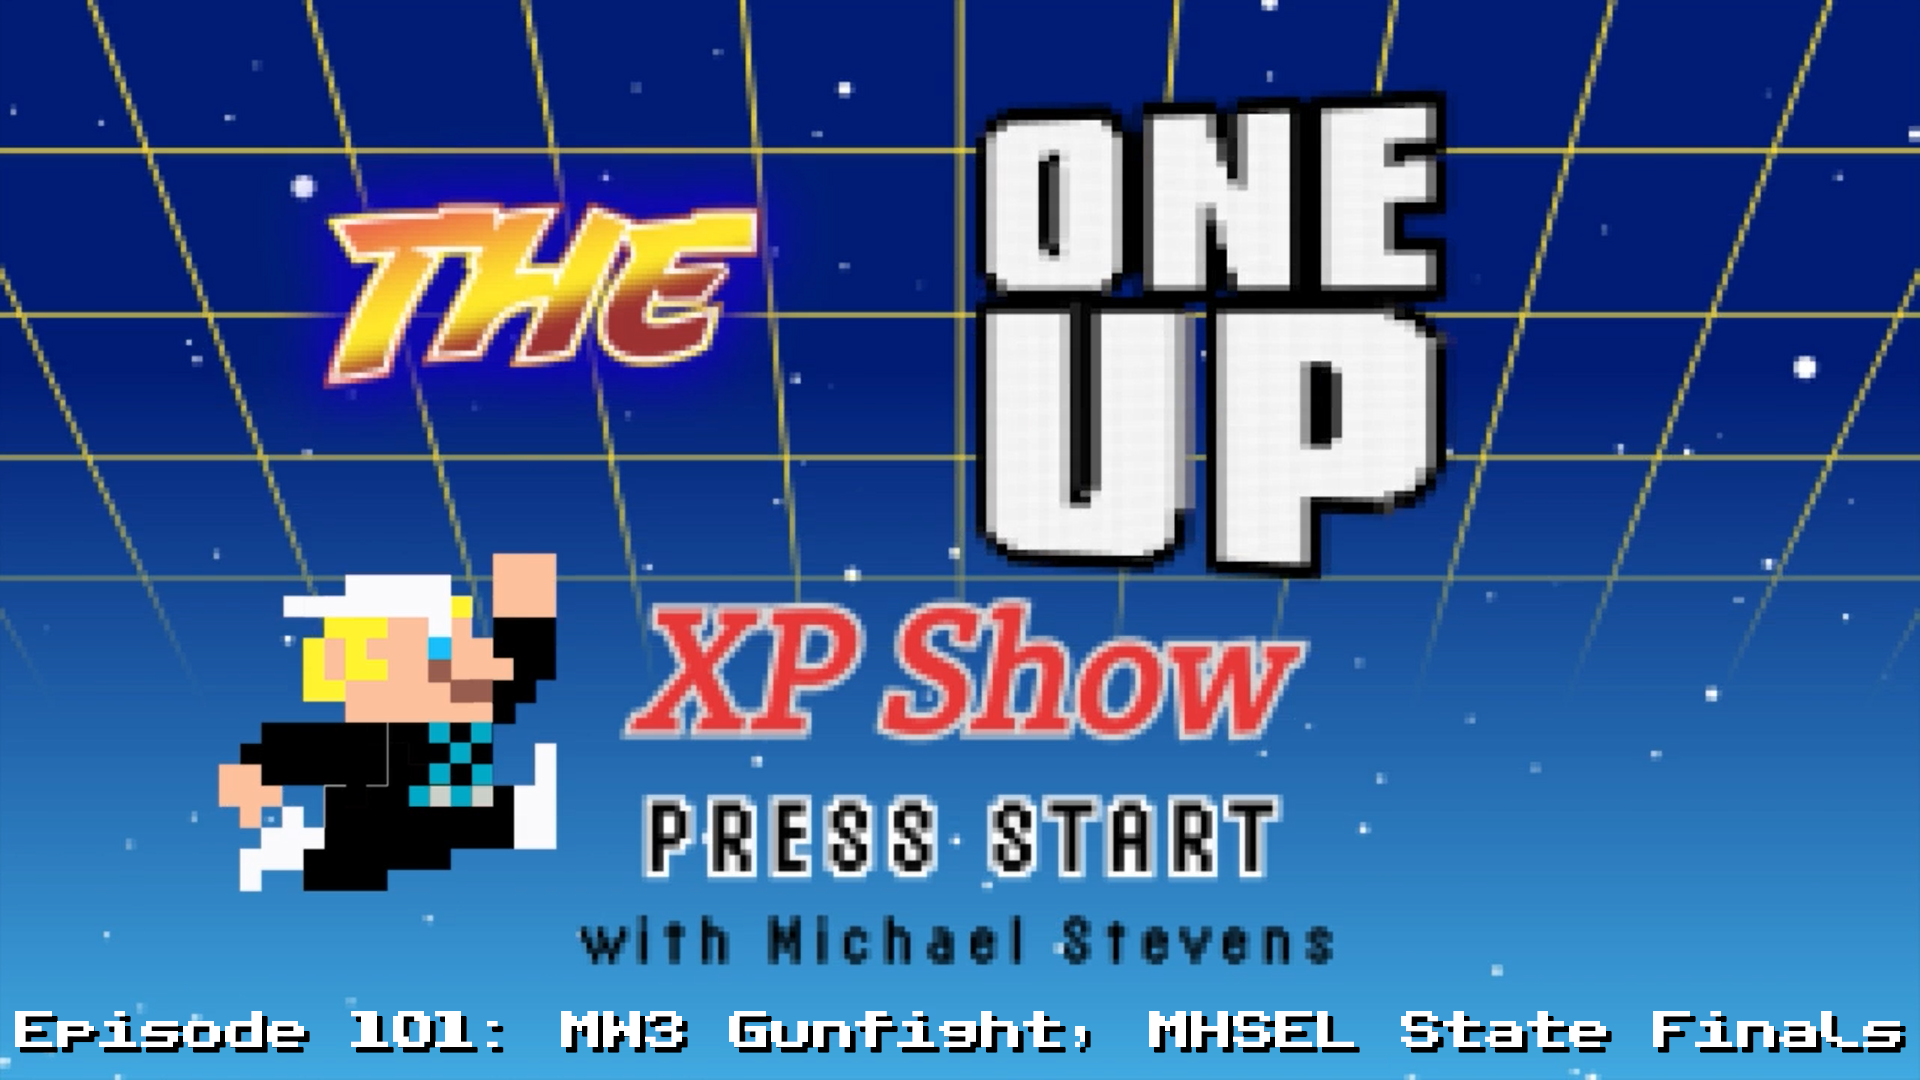 The One Up XP Show - Episode 101: MW3 Gunfight, MHSEL Semi & State Finals